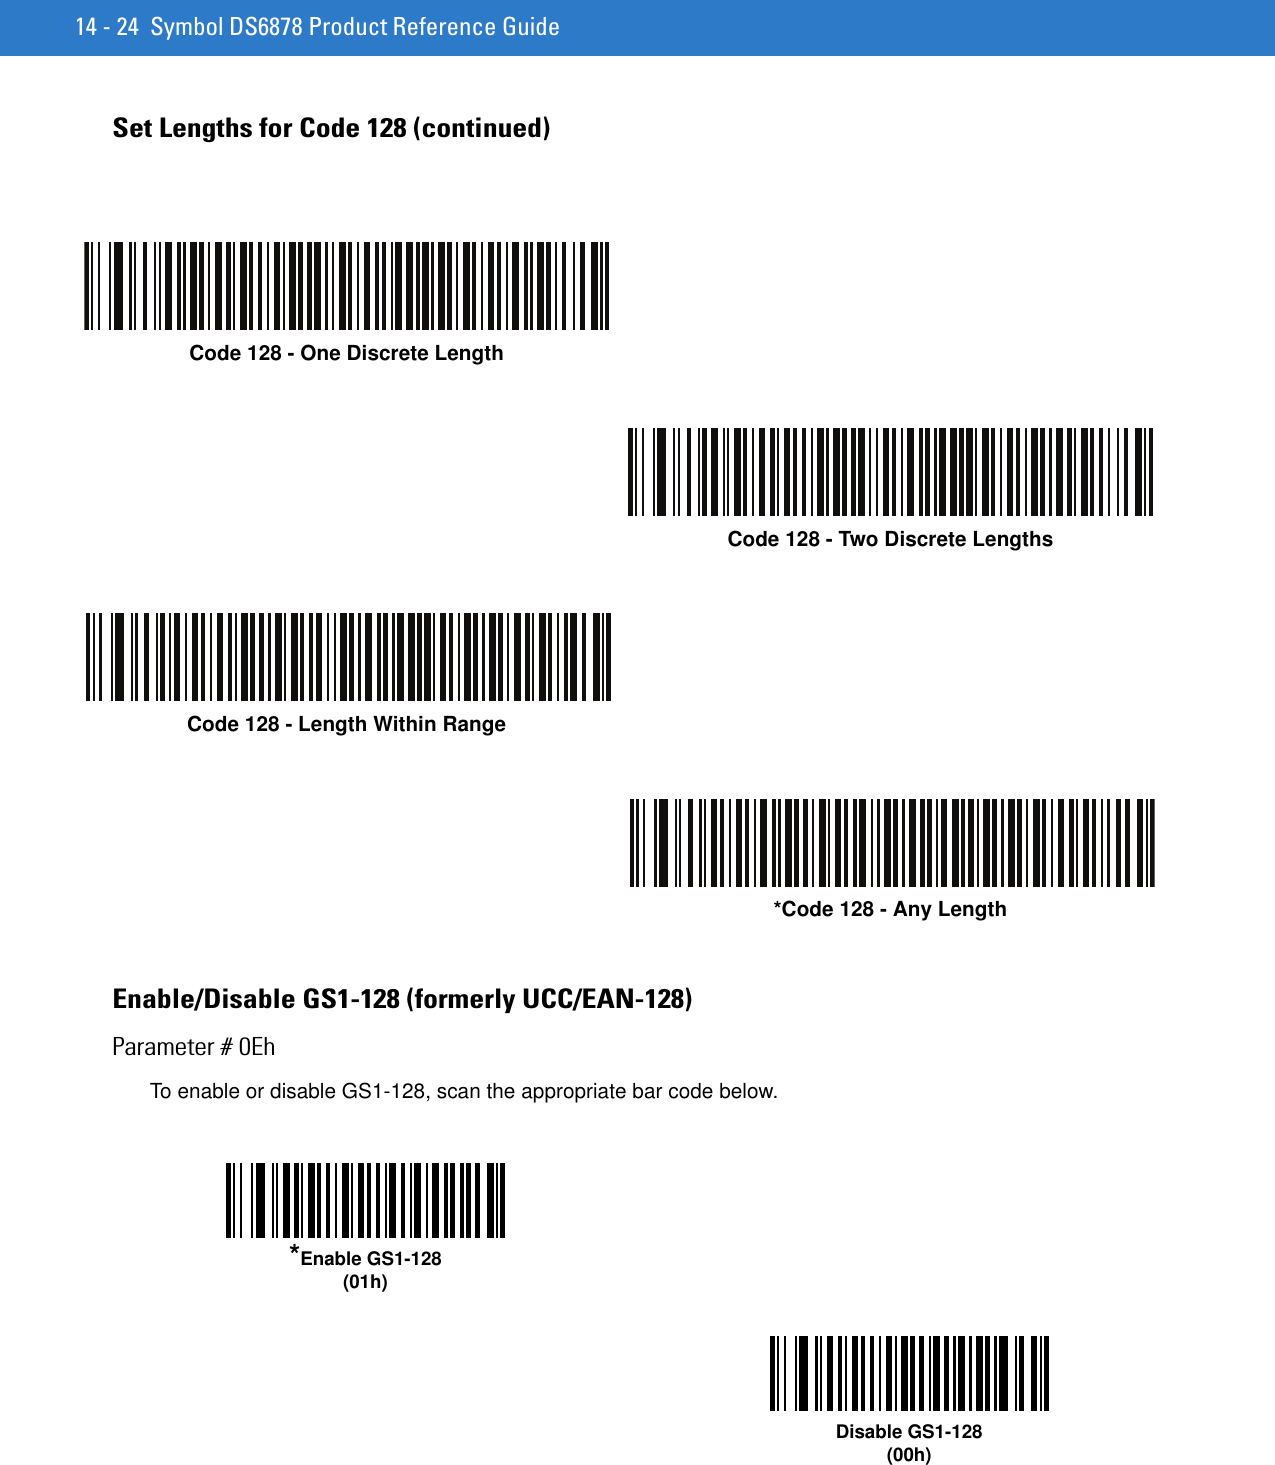 14 - 24 Symbol DS6878 Product Reference GuideSet Lengths for Code 128 (continued)Enable/Disable GS1-128 (formerly UCC/EAN-128)Parameter # 0EhTo enable or disable GS1-128, scan the appropriate bar code below. Code 128 - One Discrete LengthCode 128 - Two Discrete LengthsCode 128 - Length Within Range*Code 128 - Any Length*Enable GS1-128(01h)Disable GS1-128(00h)